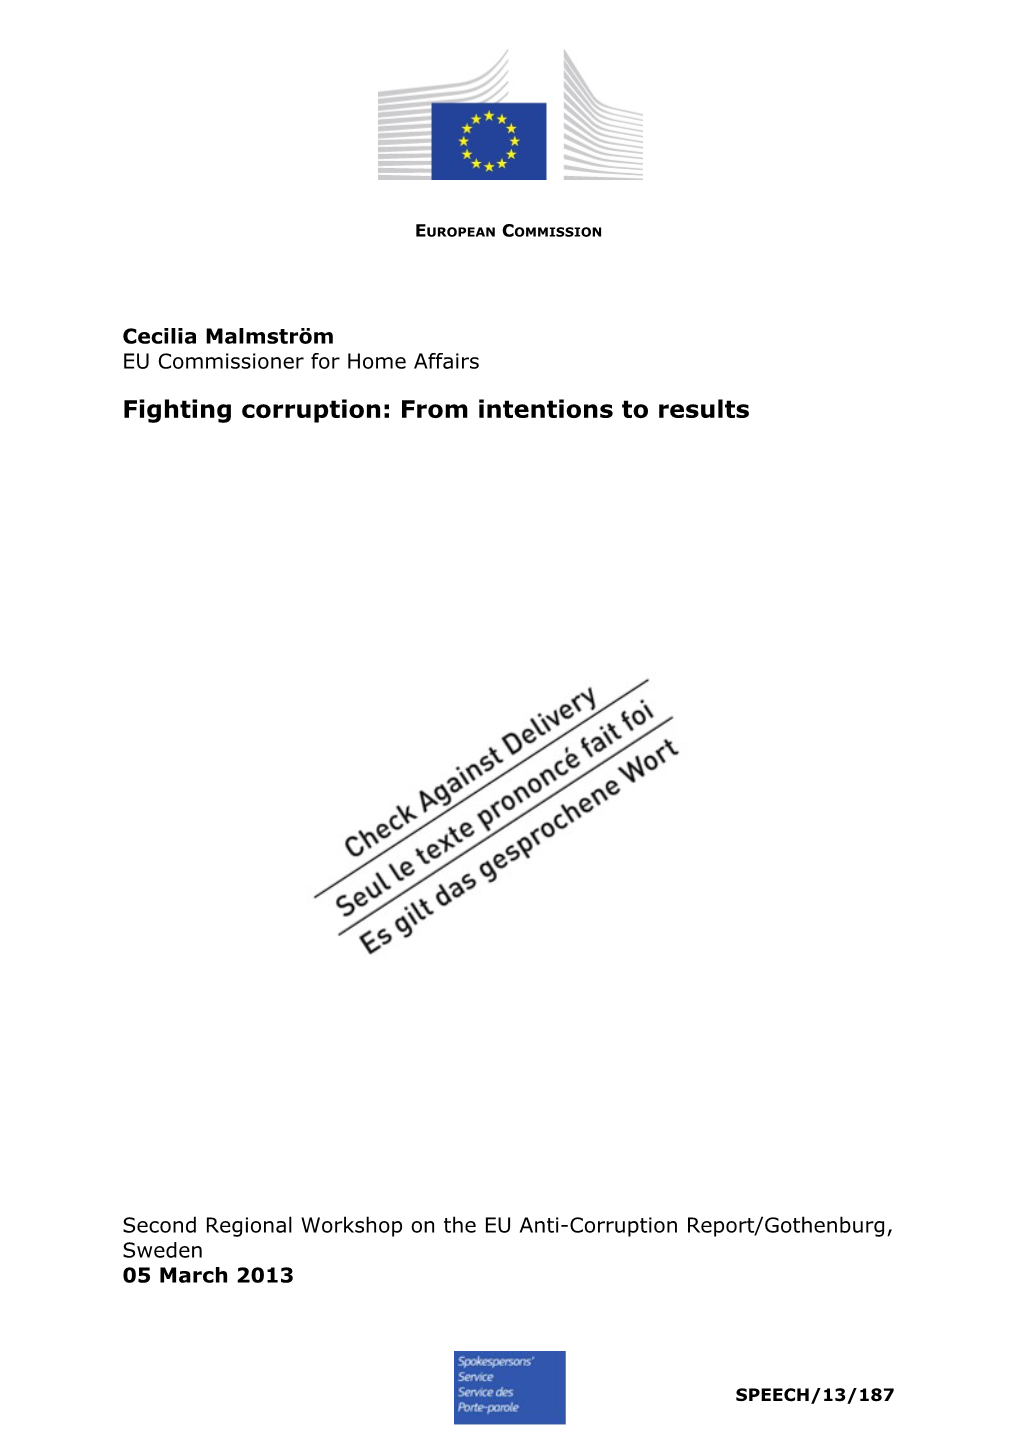 Fighting Corruption: from Intentions to Results